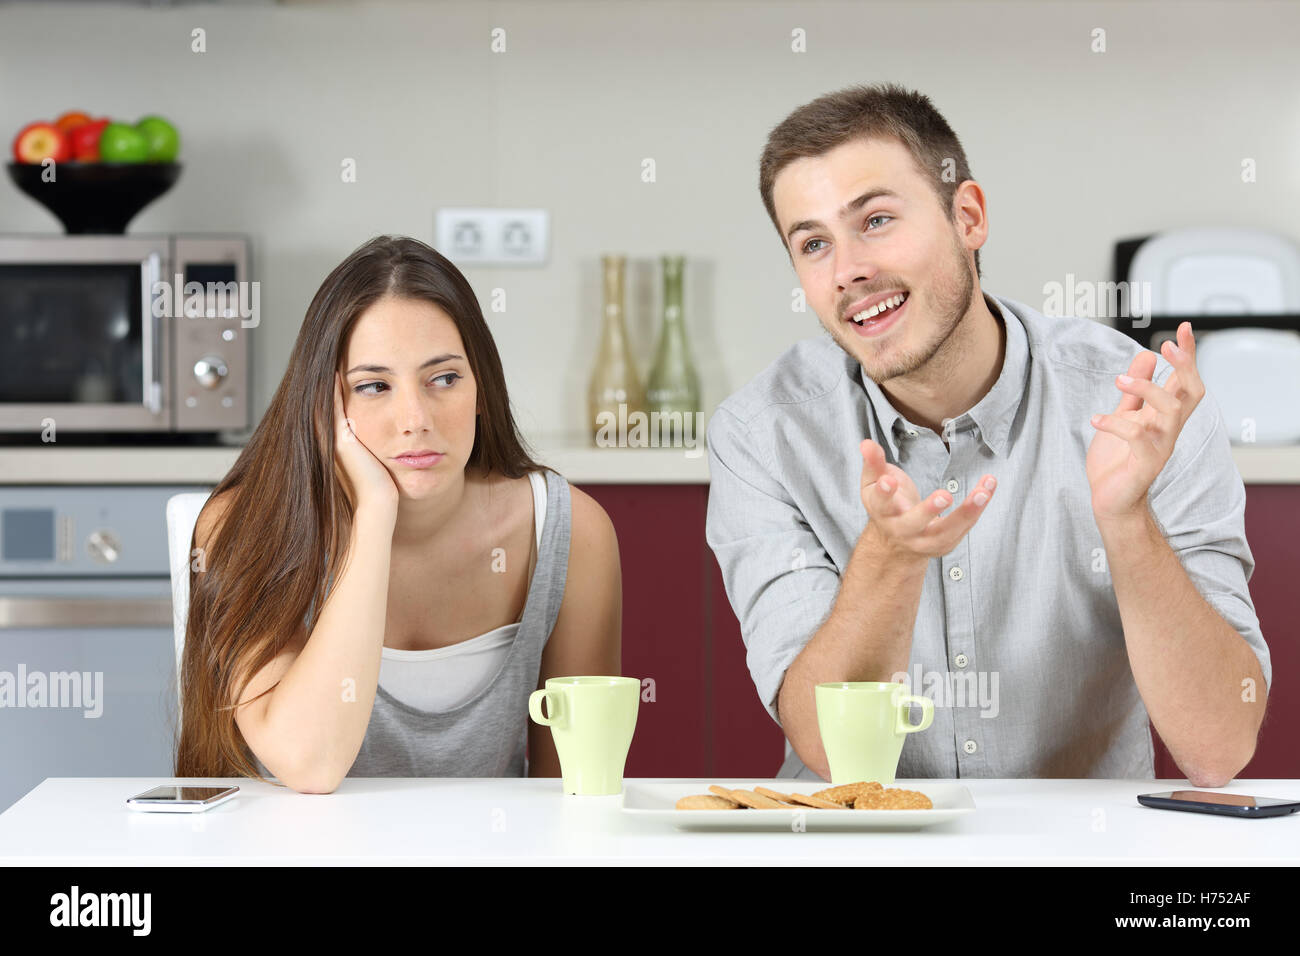 Bored wife hearing her husband talking during breakfast in the kitchen at home Stock Photo